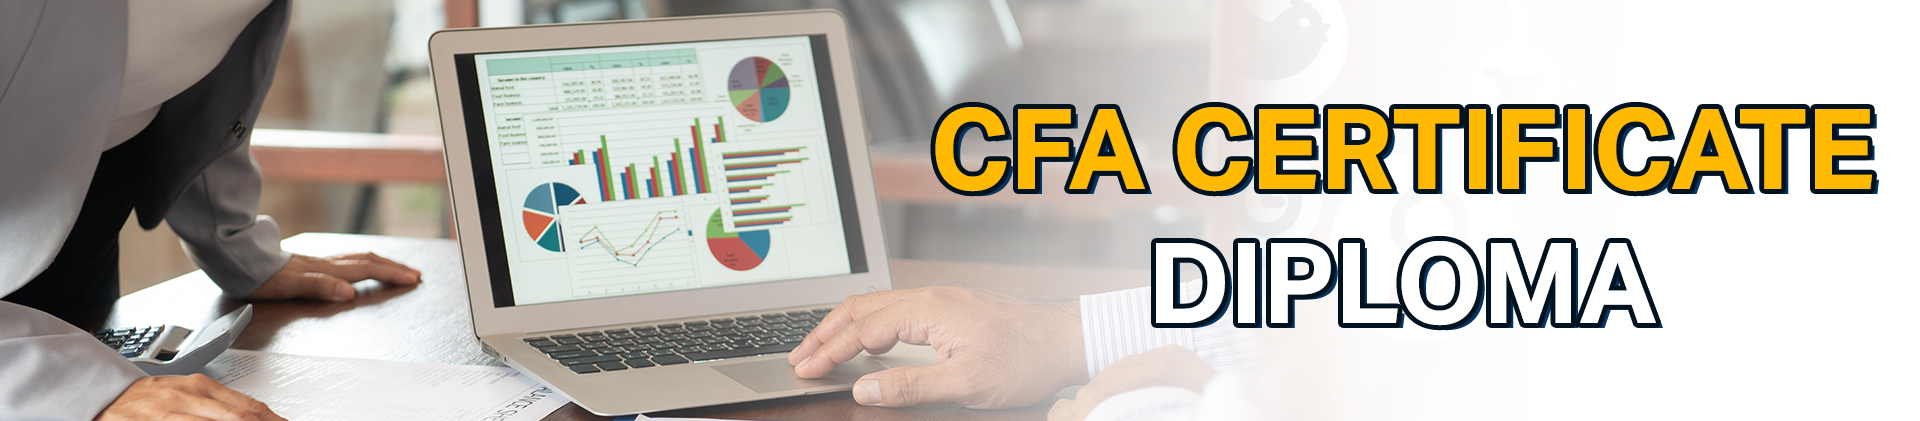 CFA - Chartered Financial Analyst